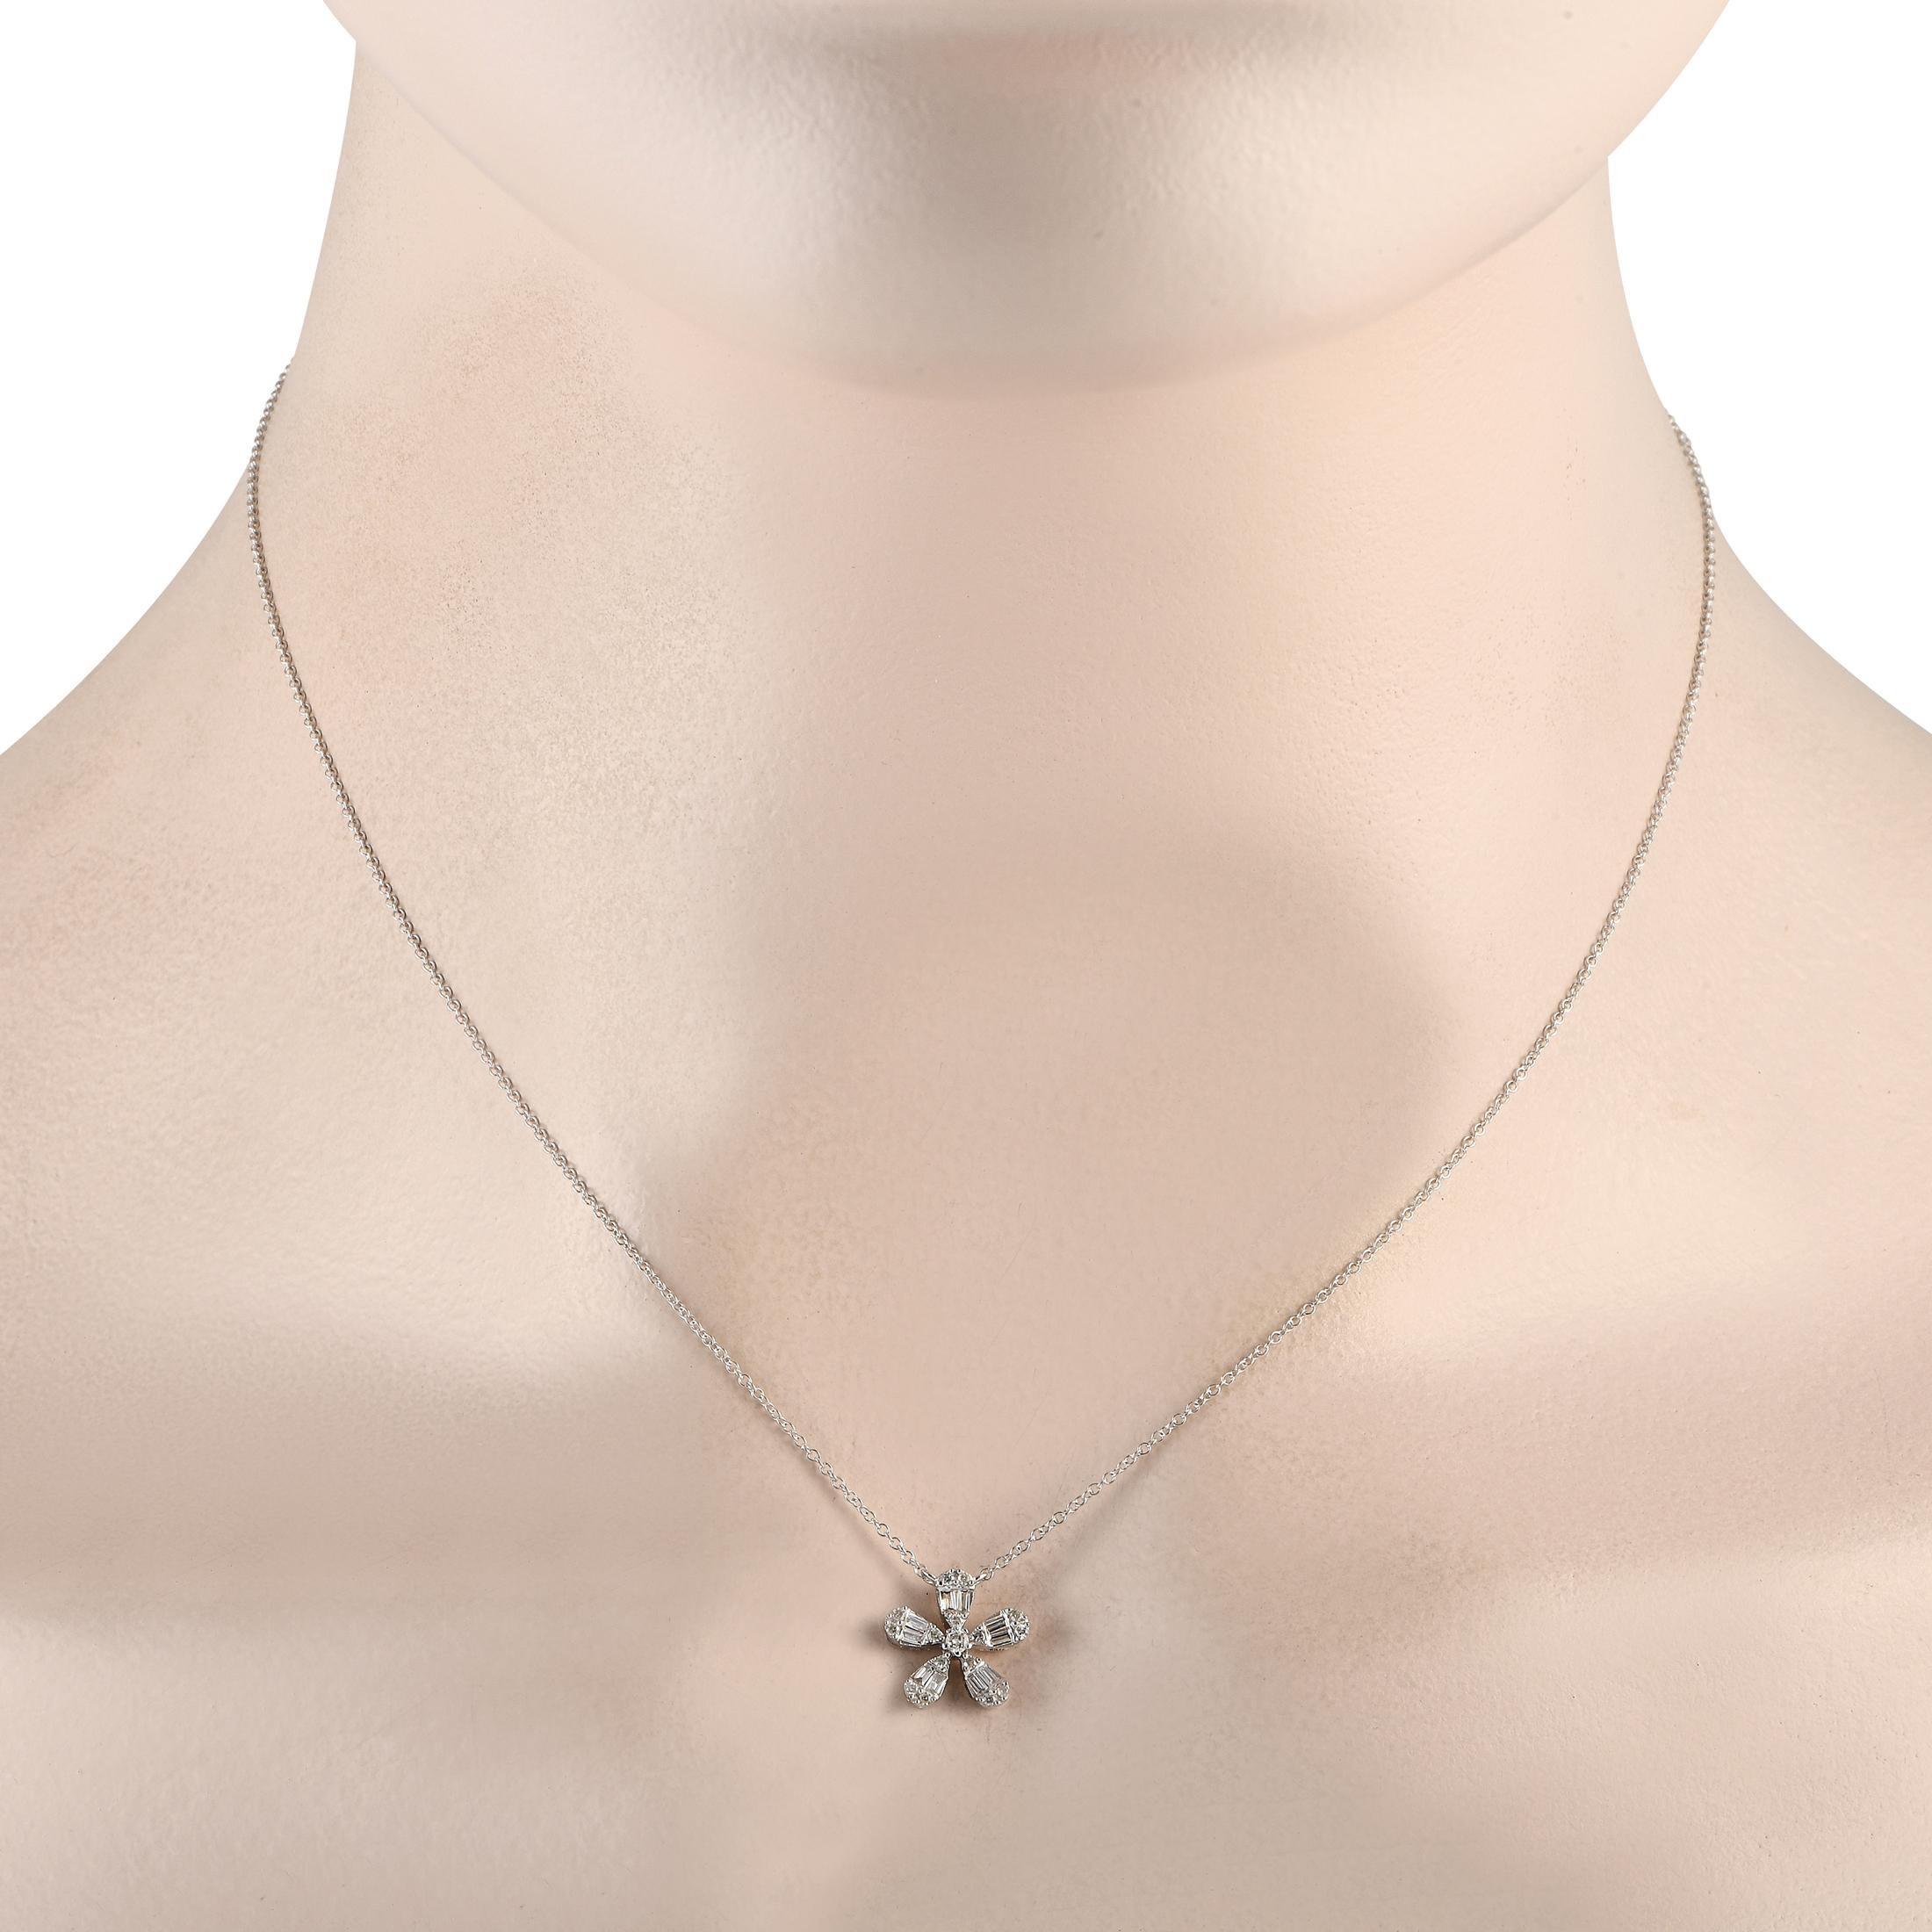 A dainty floral shaped pendant measuring 0.45 round makes a statement thanks to inset diamonds totaling 0.23 carats on this charming necklace. This elegant accessory is crafted from 14K white gold and features a delicate chain measuring 16 long.This